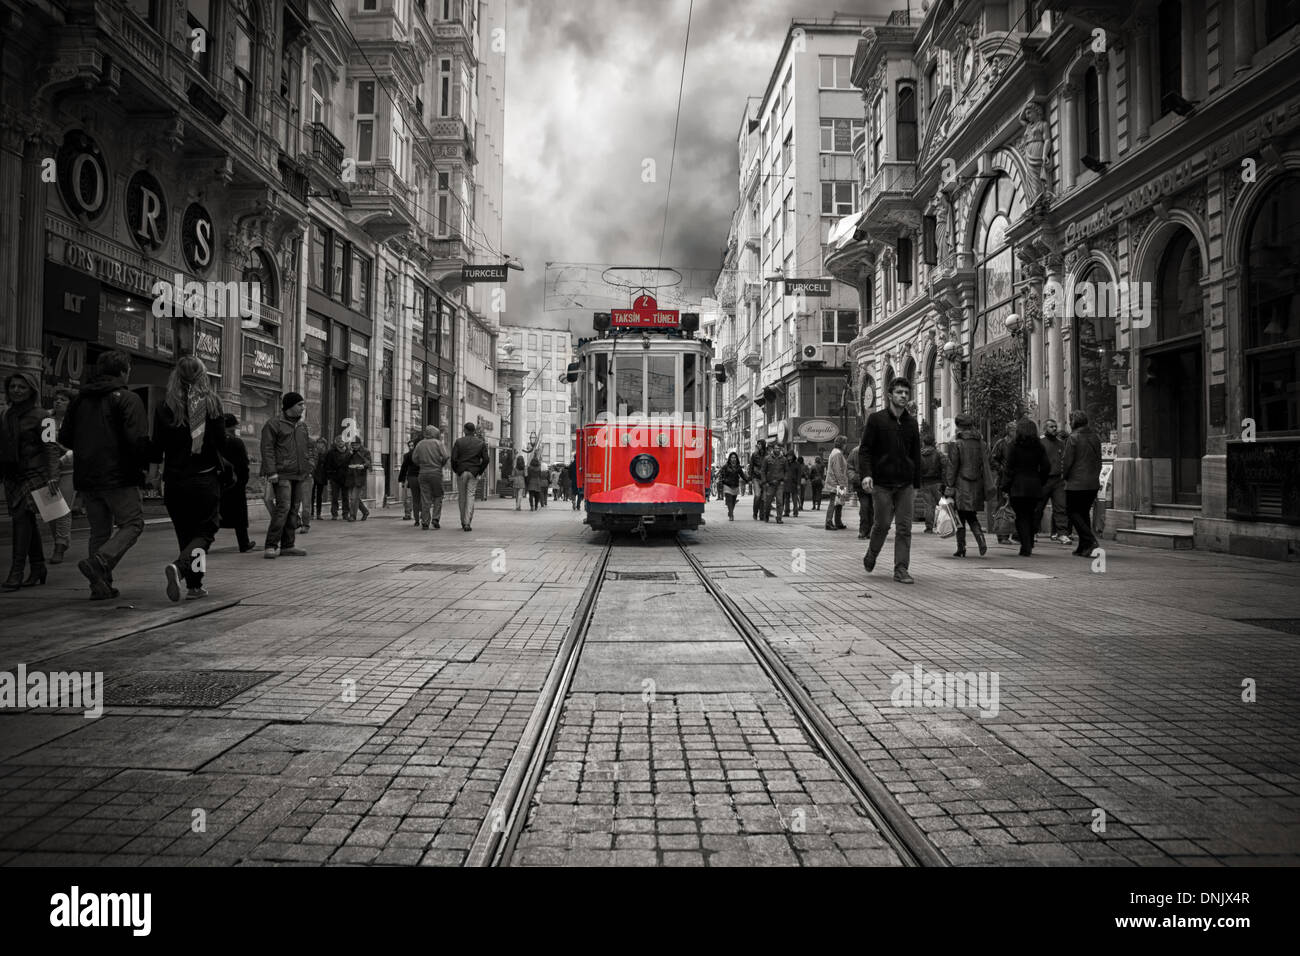 One of the famous Old Red Trams in the Taksim area in Istanbul, Turkey. Stock Photo